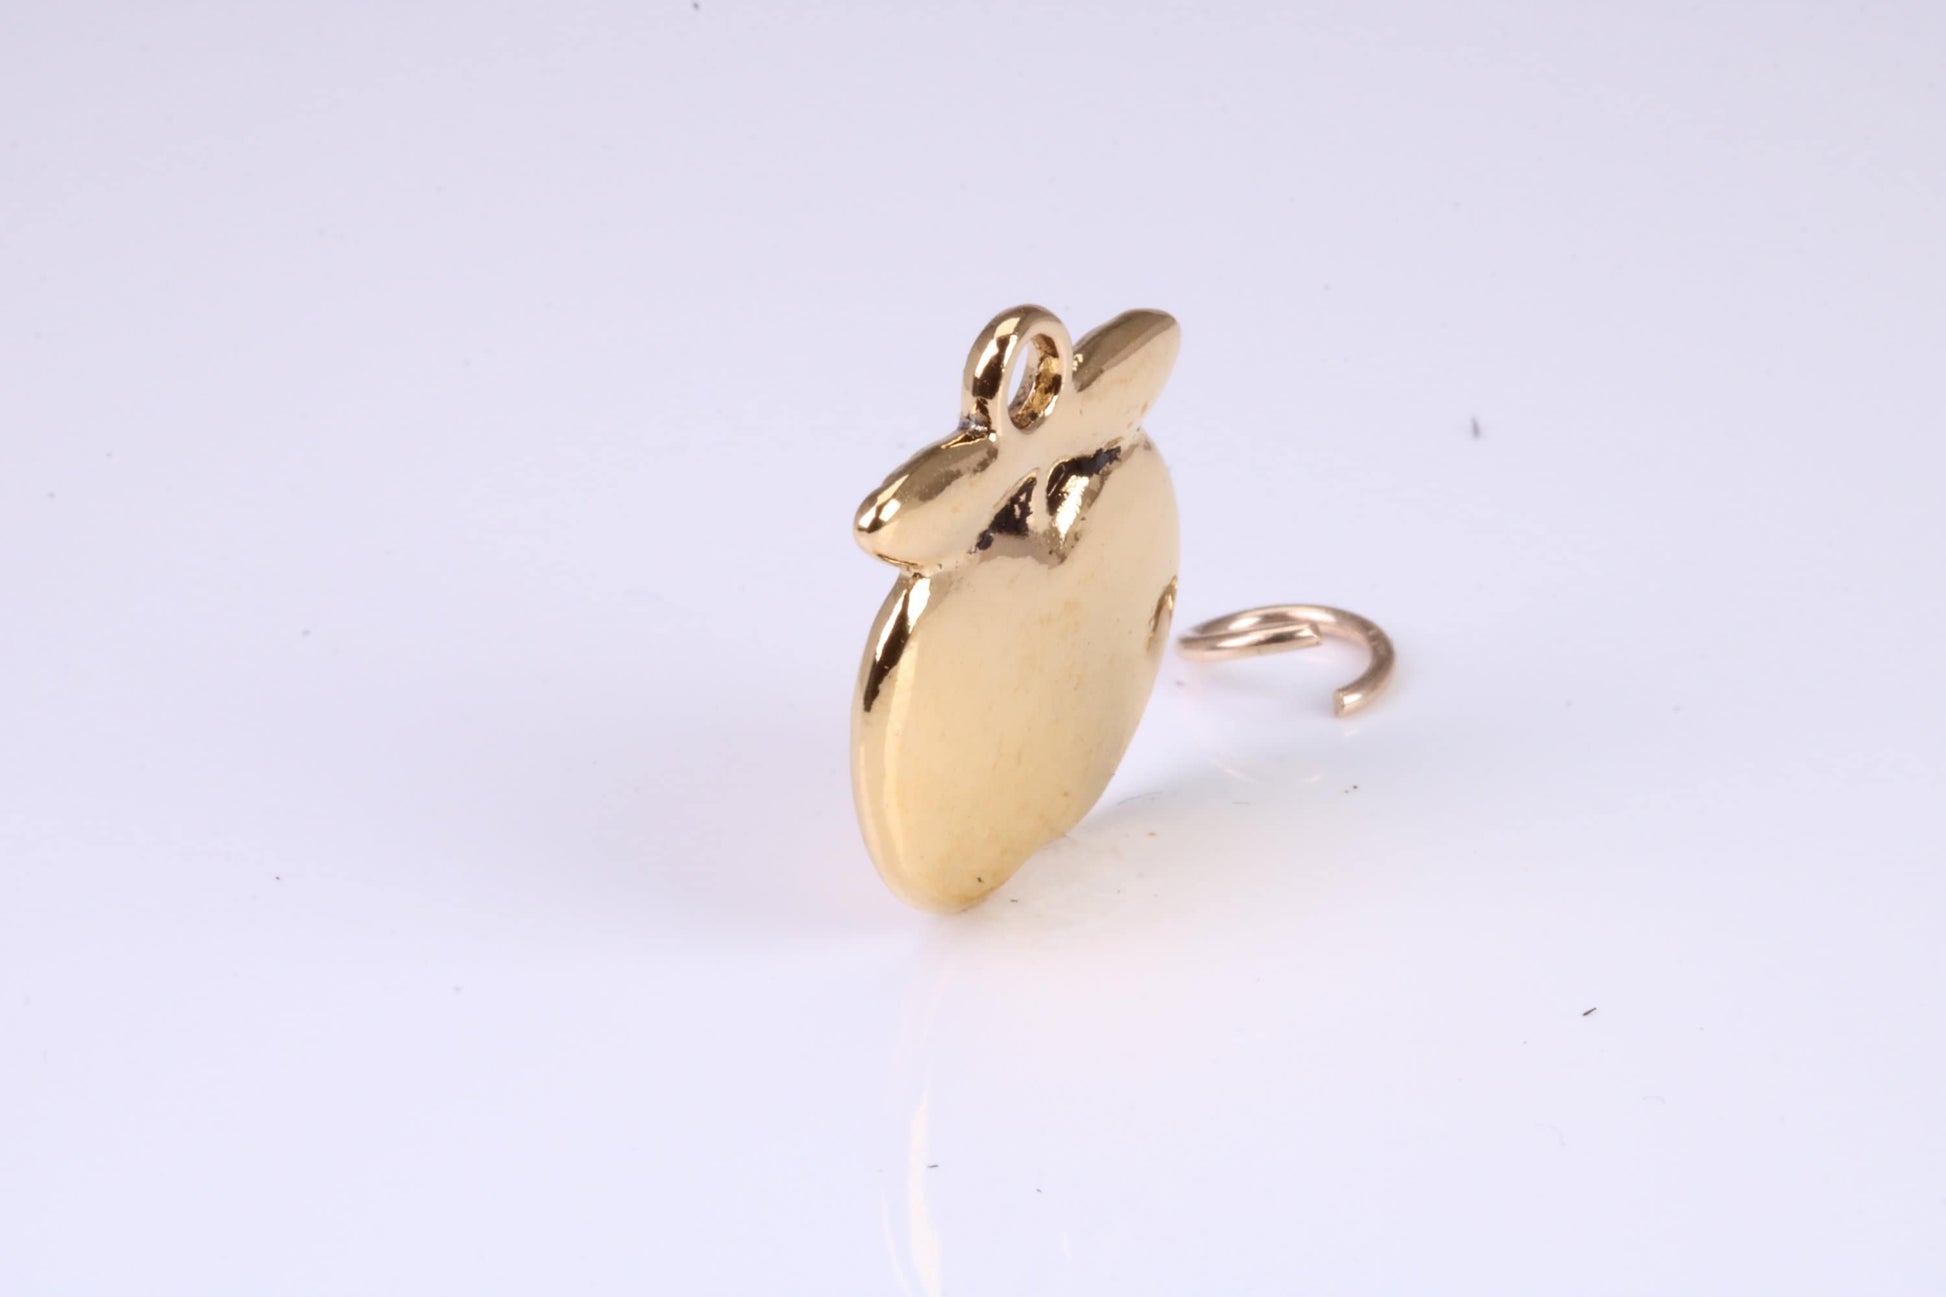 Apple Charm, Traditional Charm, Made from Solid Yellow Gold, British Hallmarked, Complete with Attachment Link